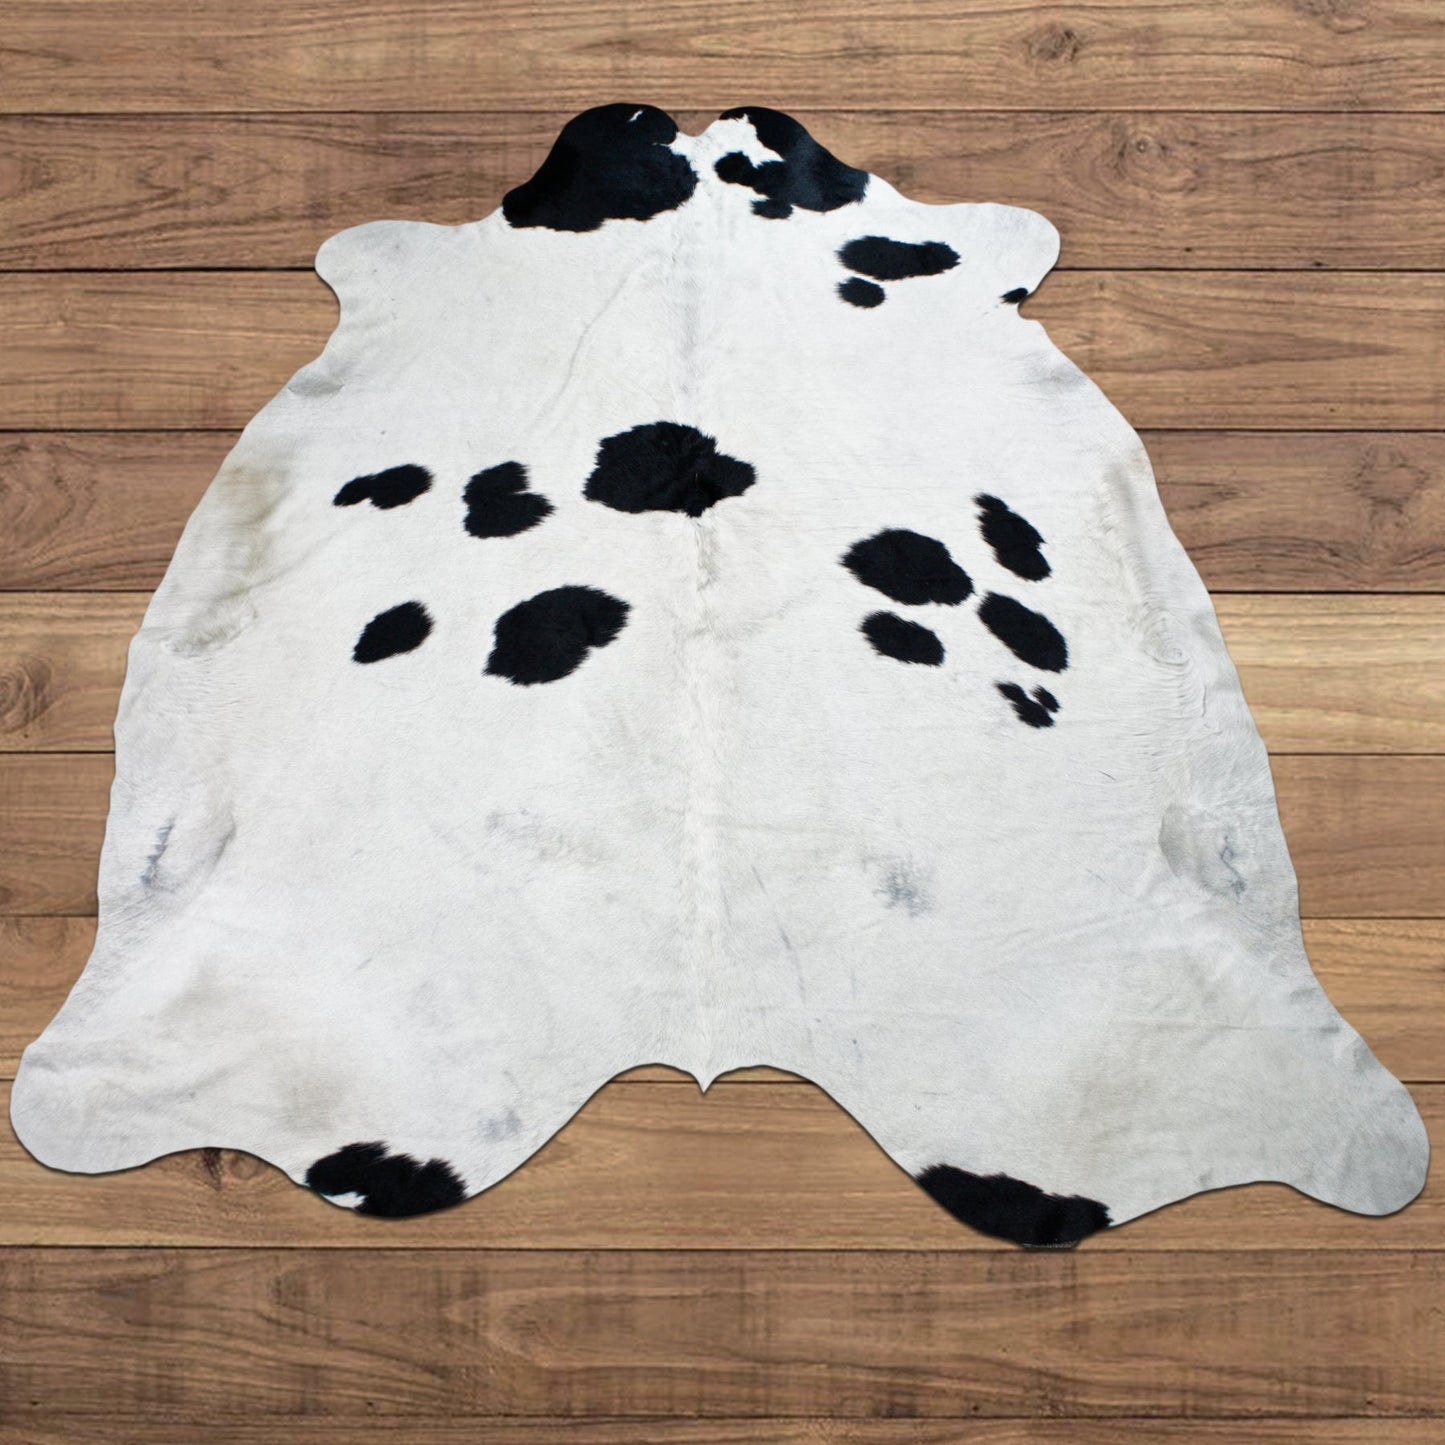 Extra Large RODEO black spots cowhide rug 7.3 x 8.10 ft-- -4307 - Rodeo Cowhide Rugs